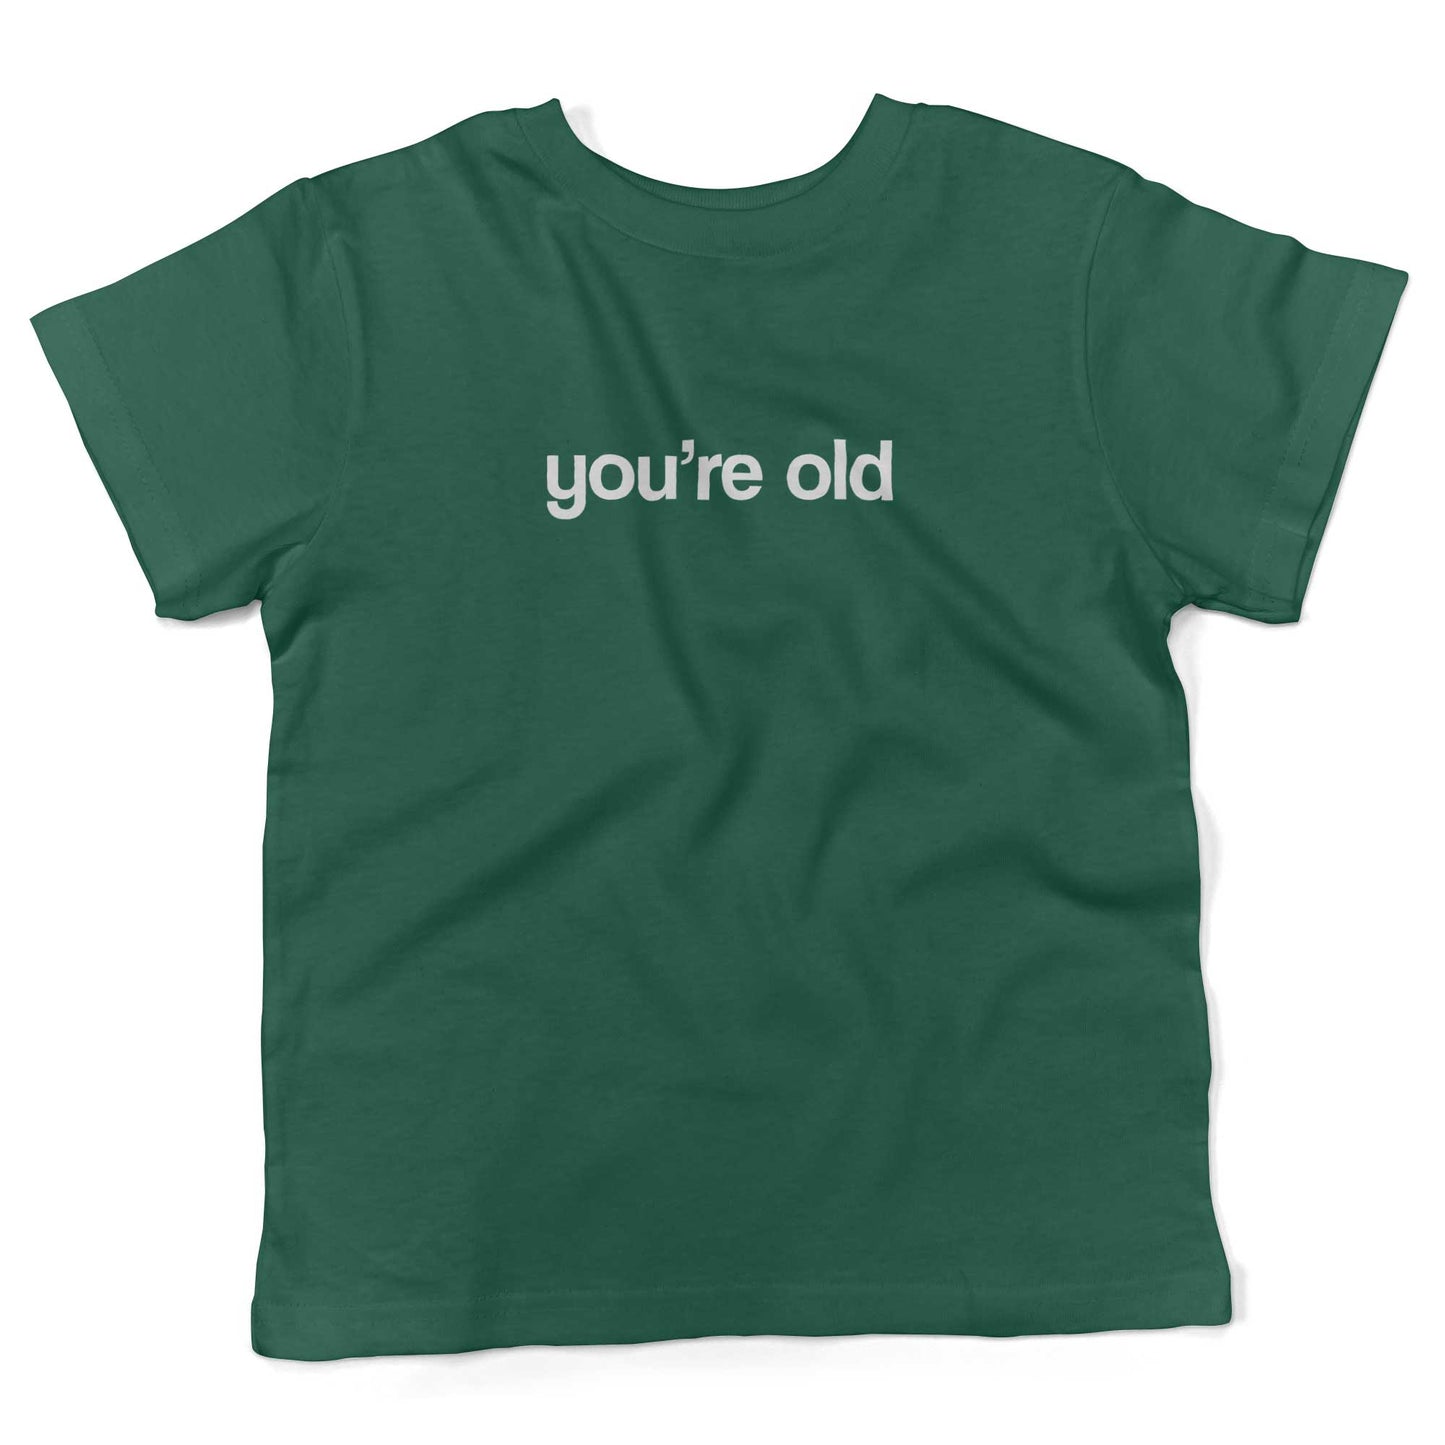 You're Old Toddler Shirt-Kelly Green-2T